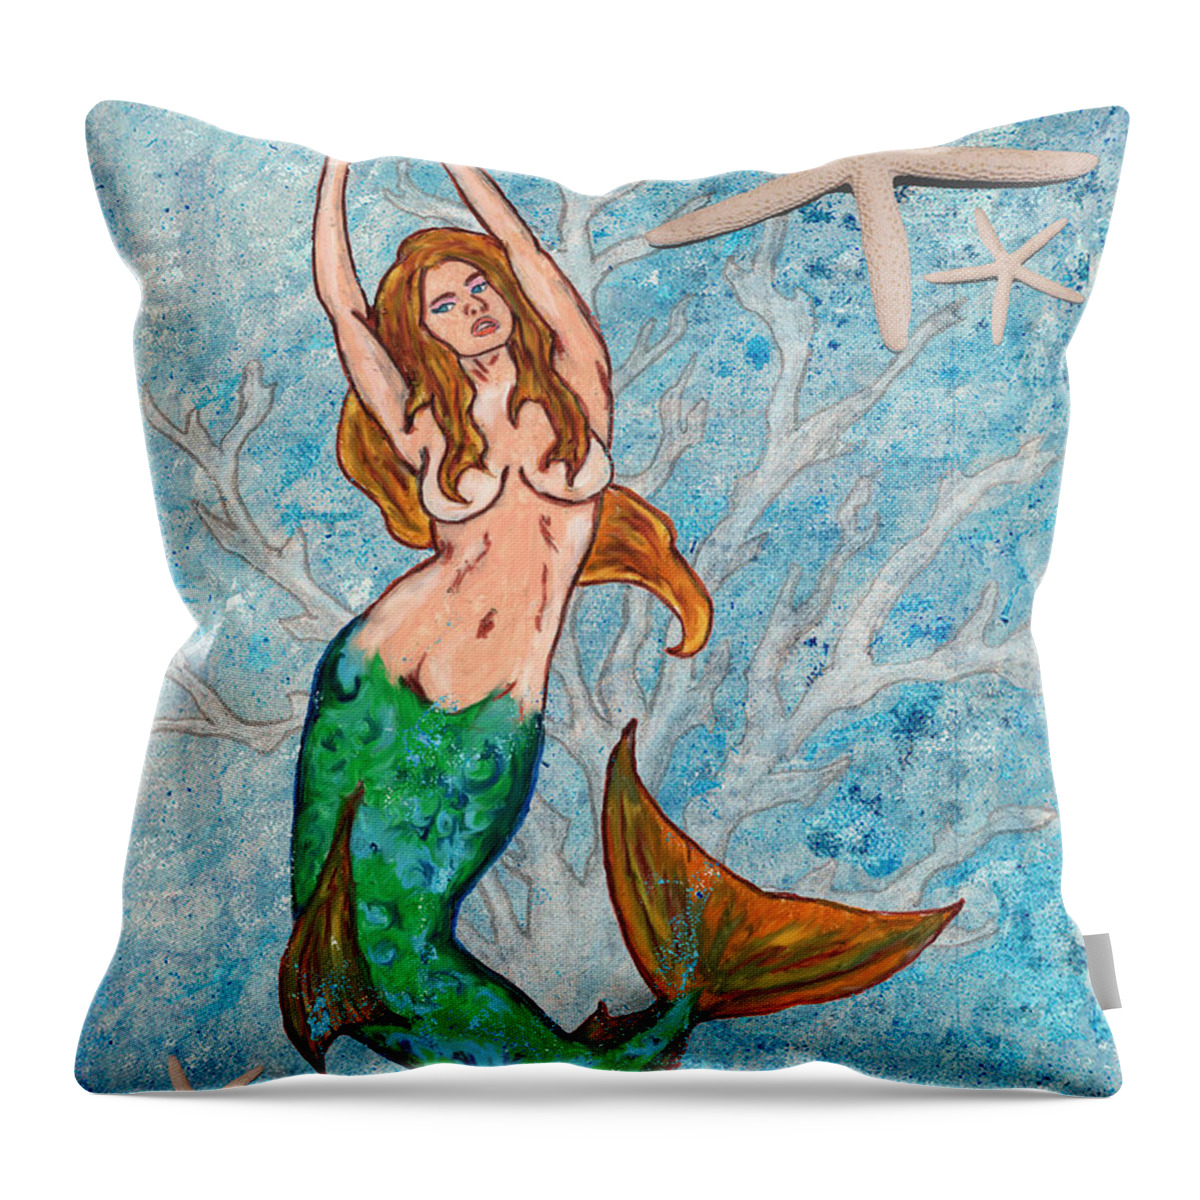 Mermaid Throw Pillow featuring the mixed media Exotic Mermaid by William Depaula